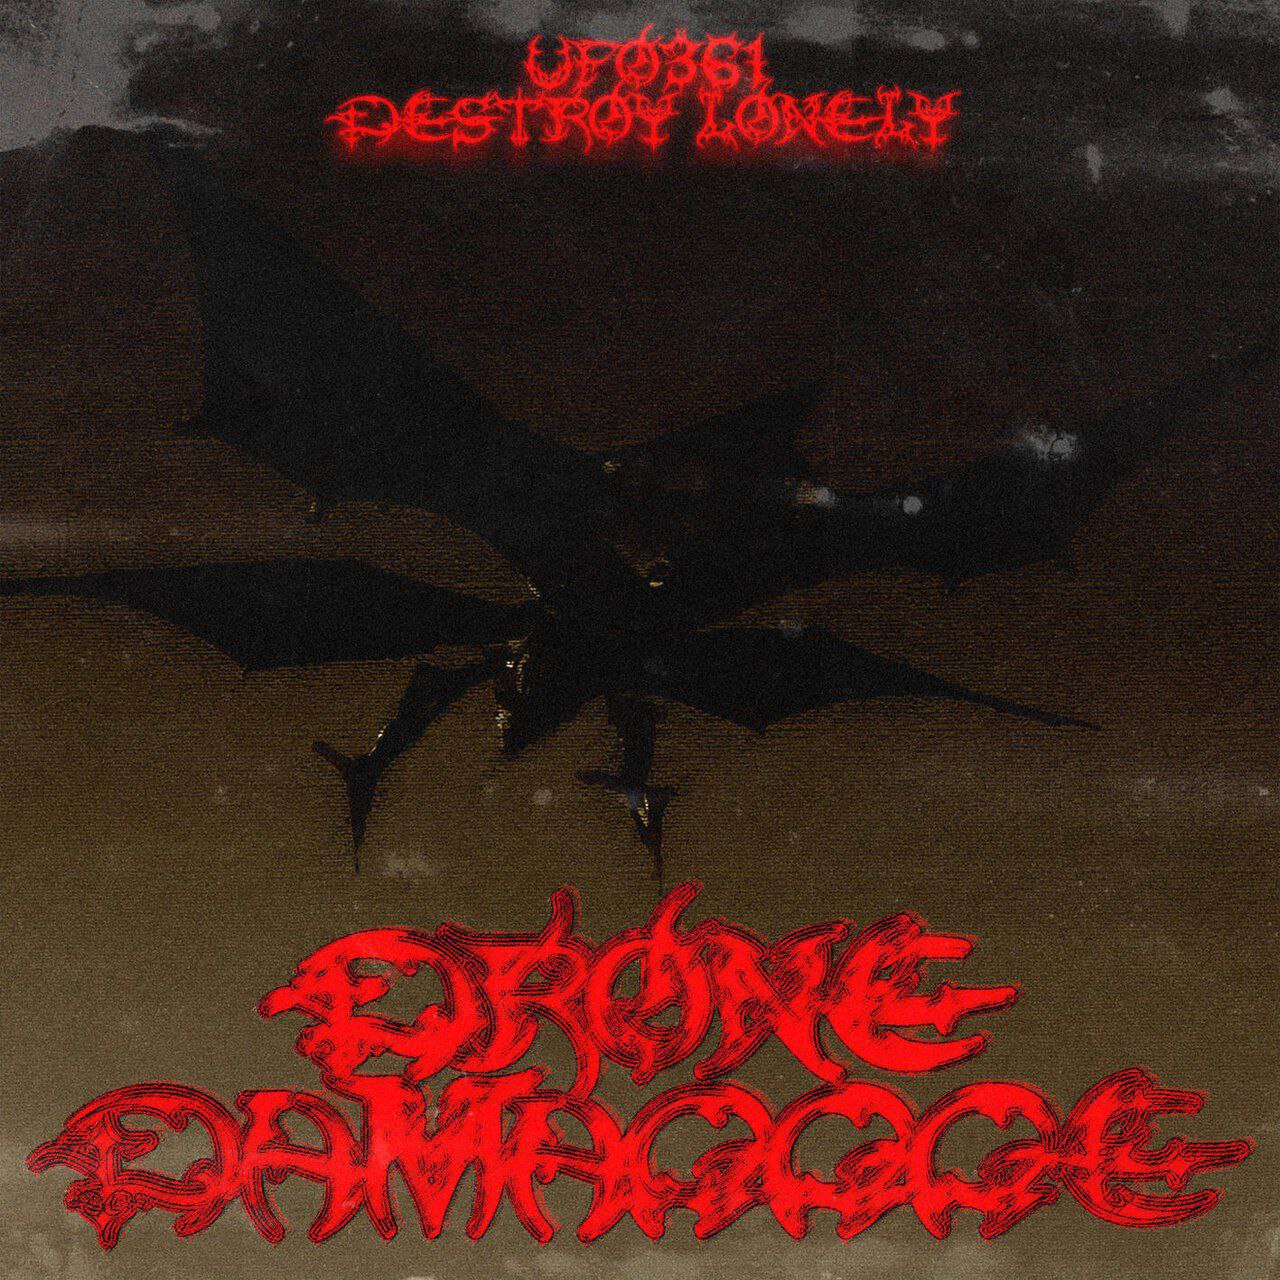 MP3: Ufo361 Ft. Destroy Lonely – Drone Damaggge